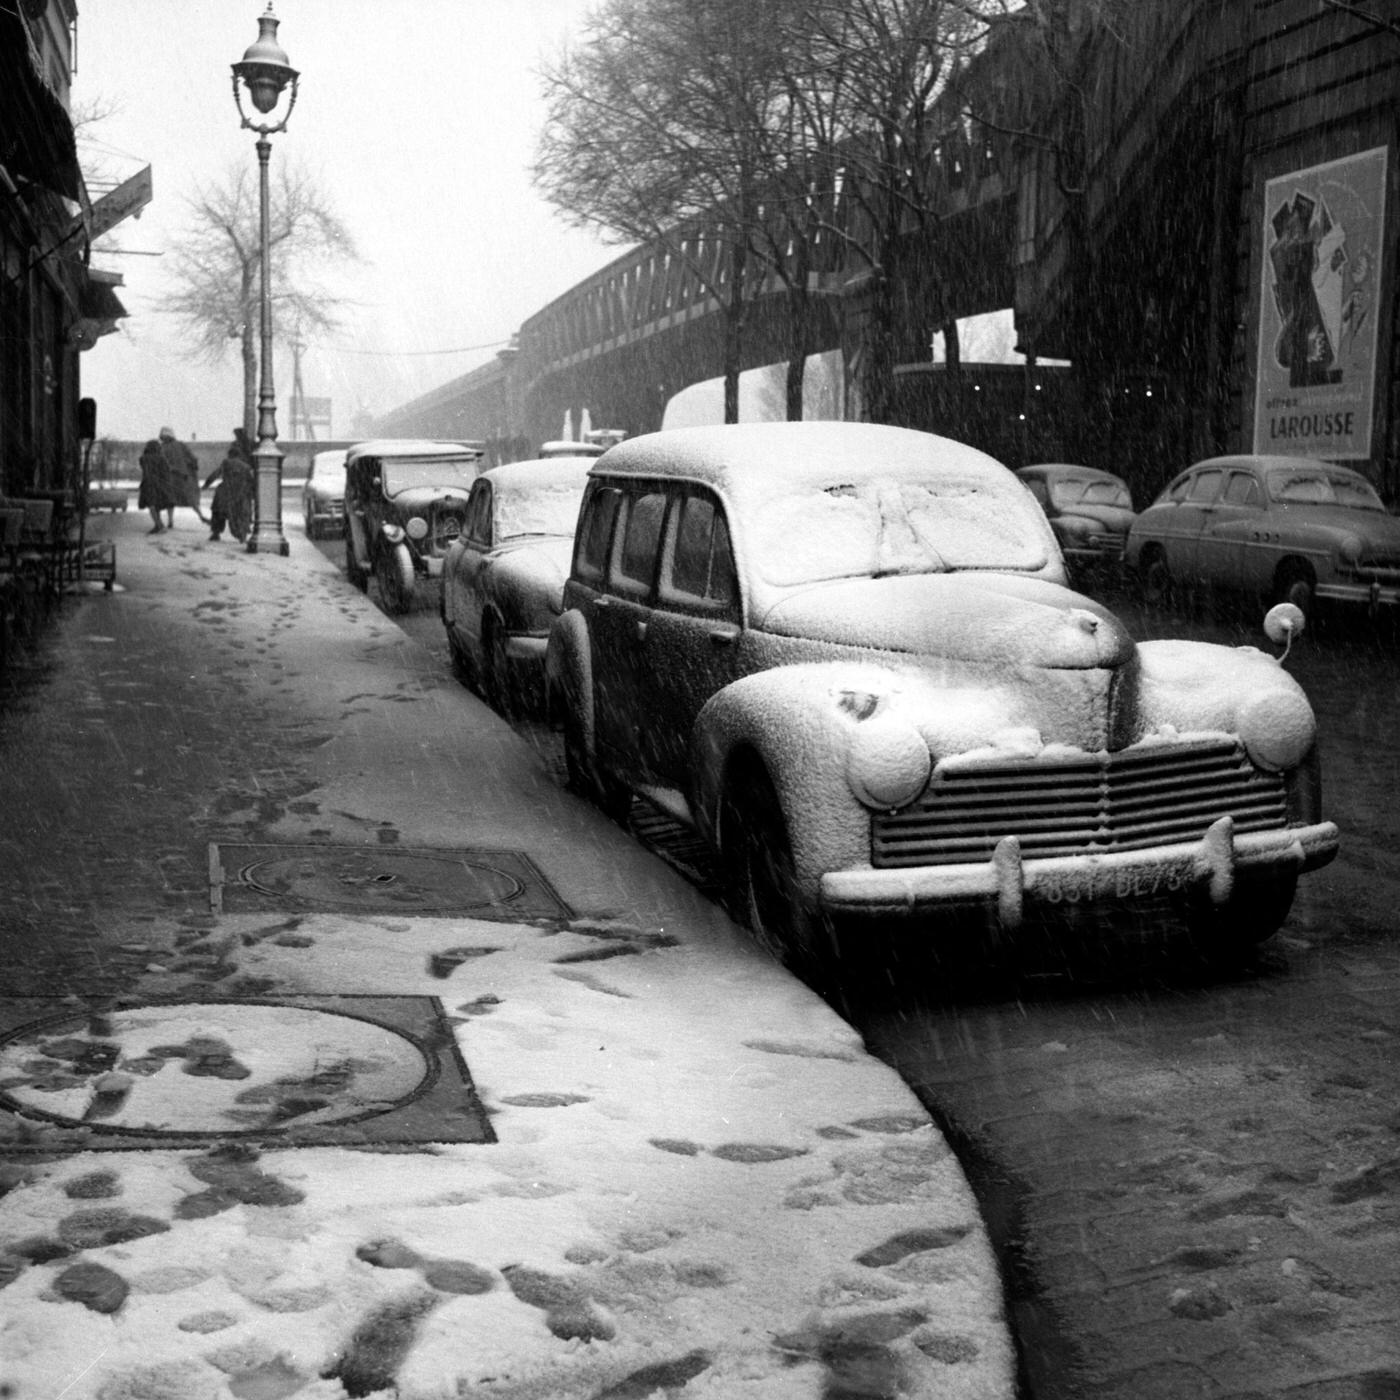 Car Covered In Snow, Paris, January 13, 1955.